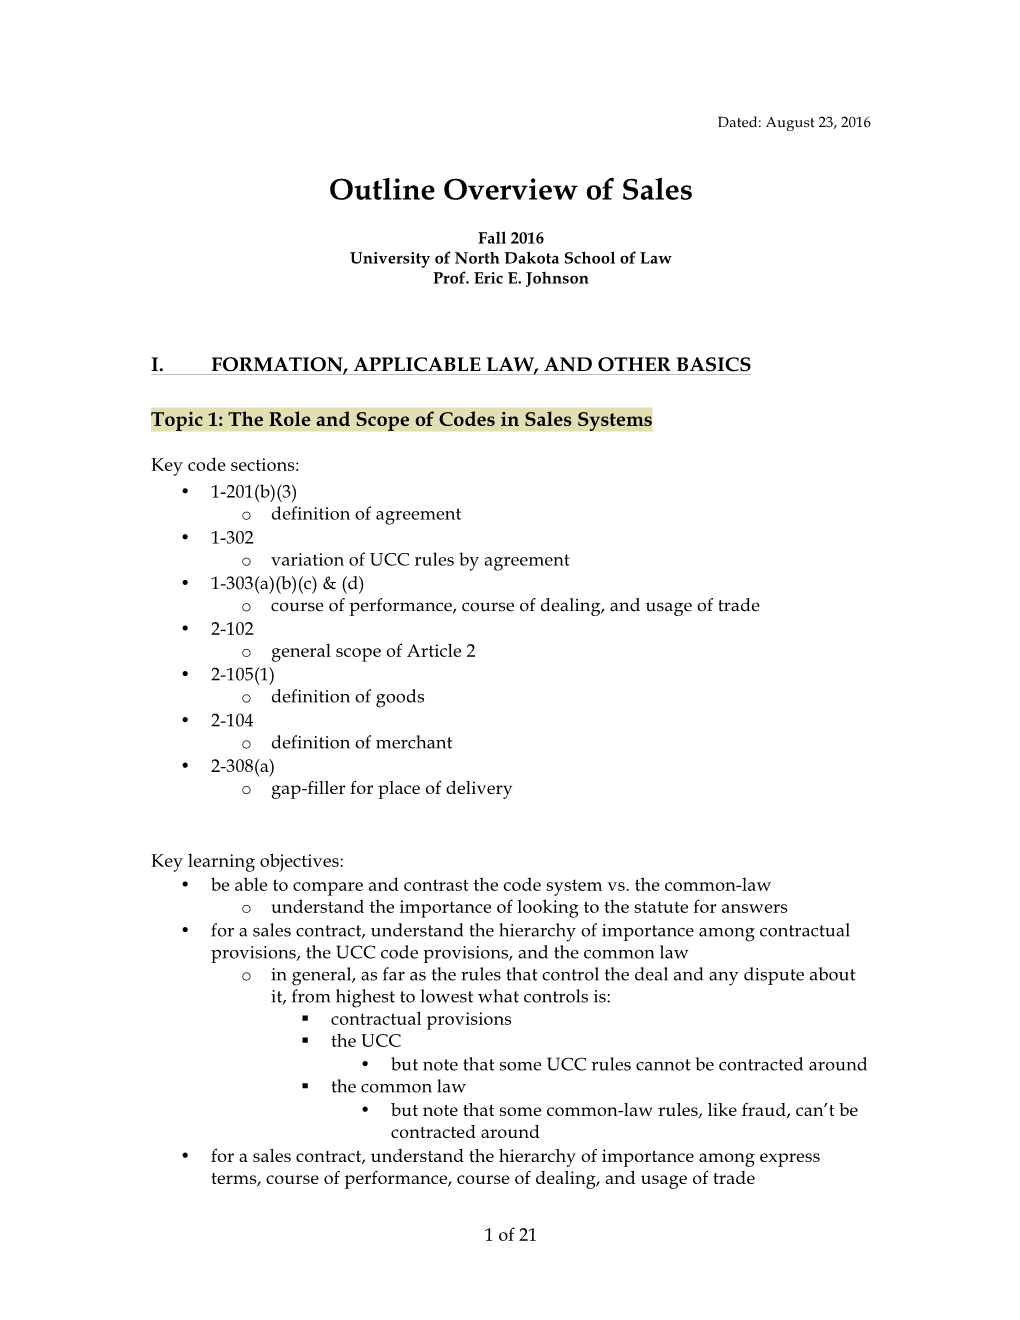 Outline Overview of Sales